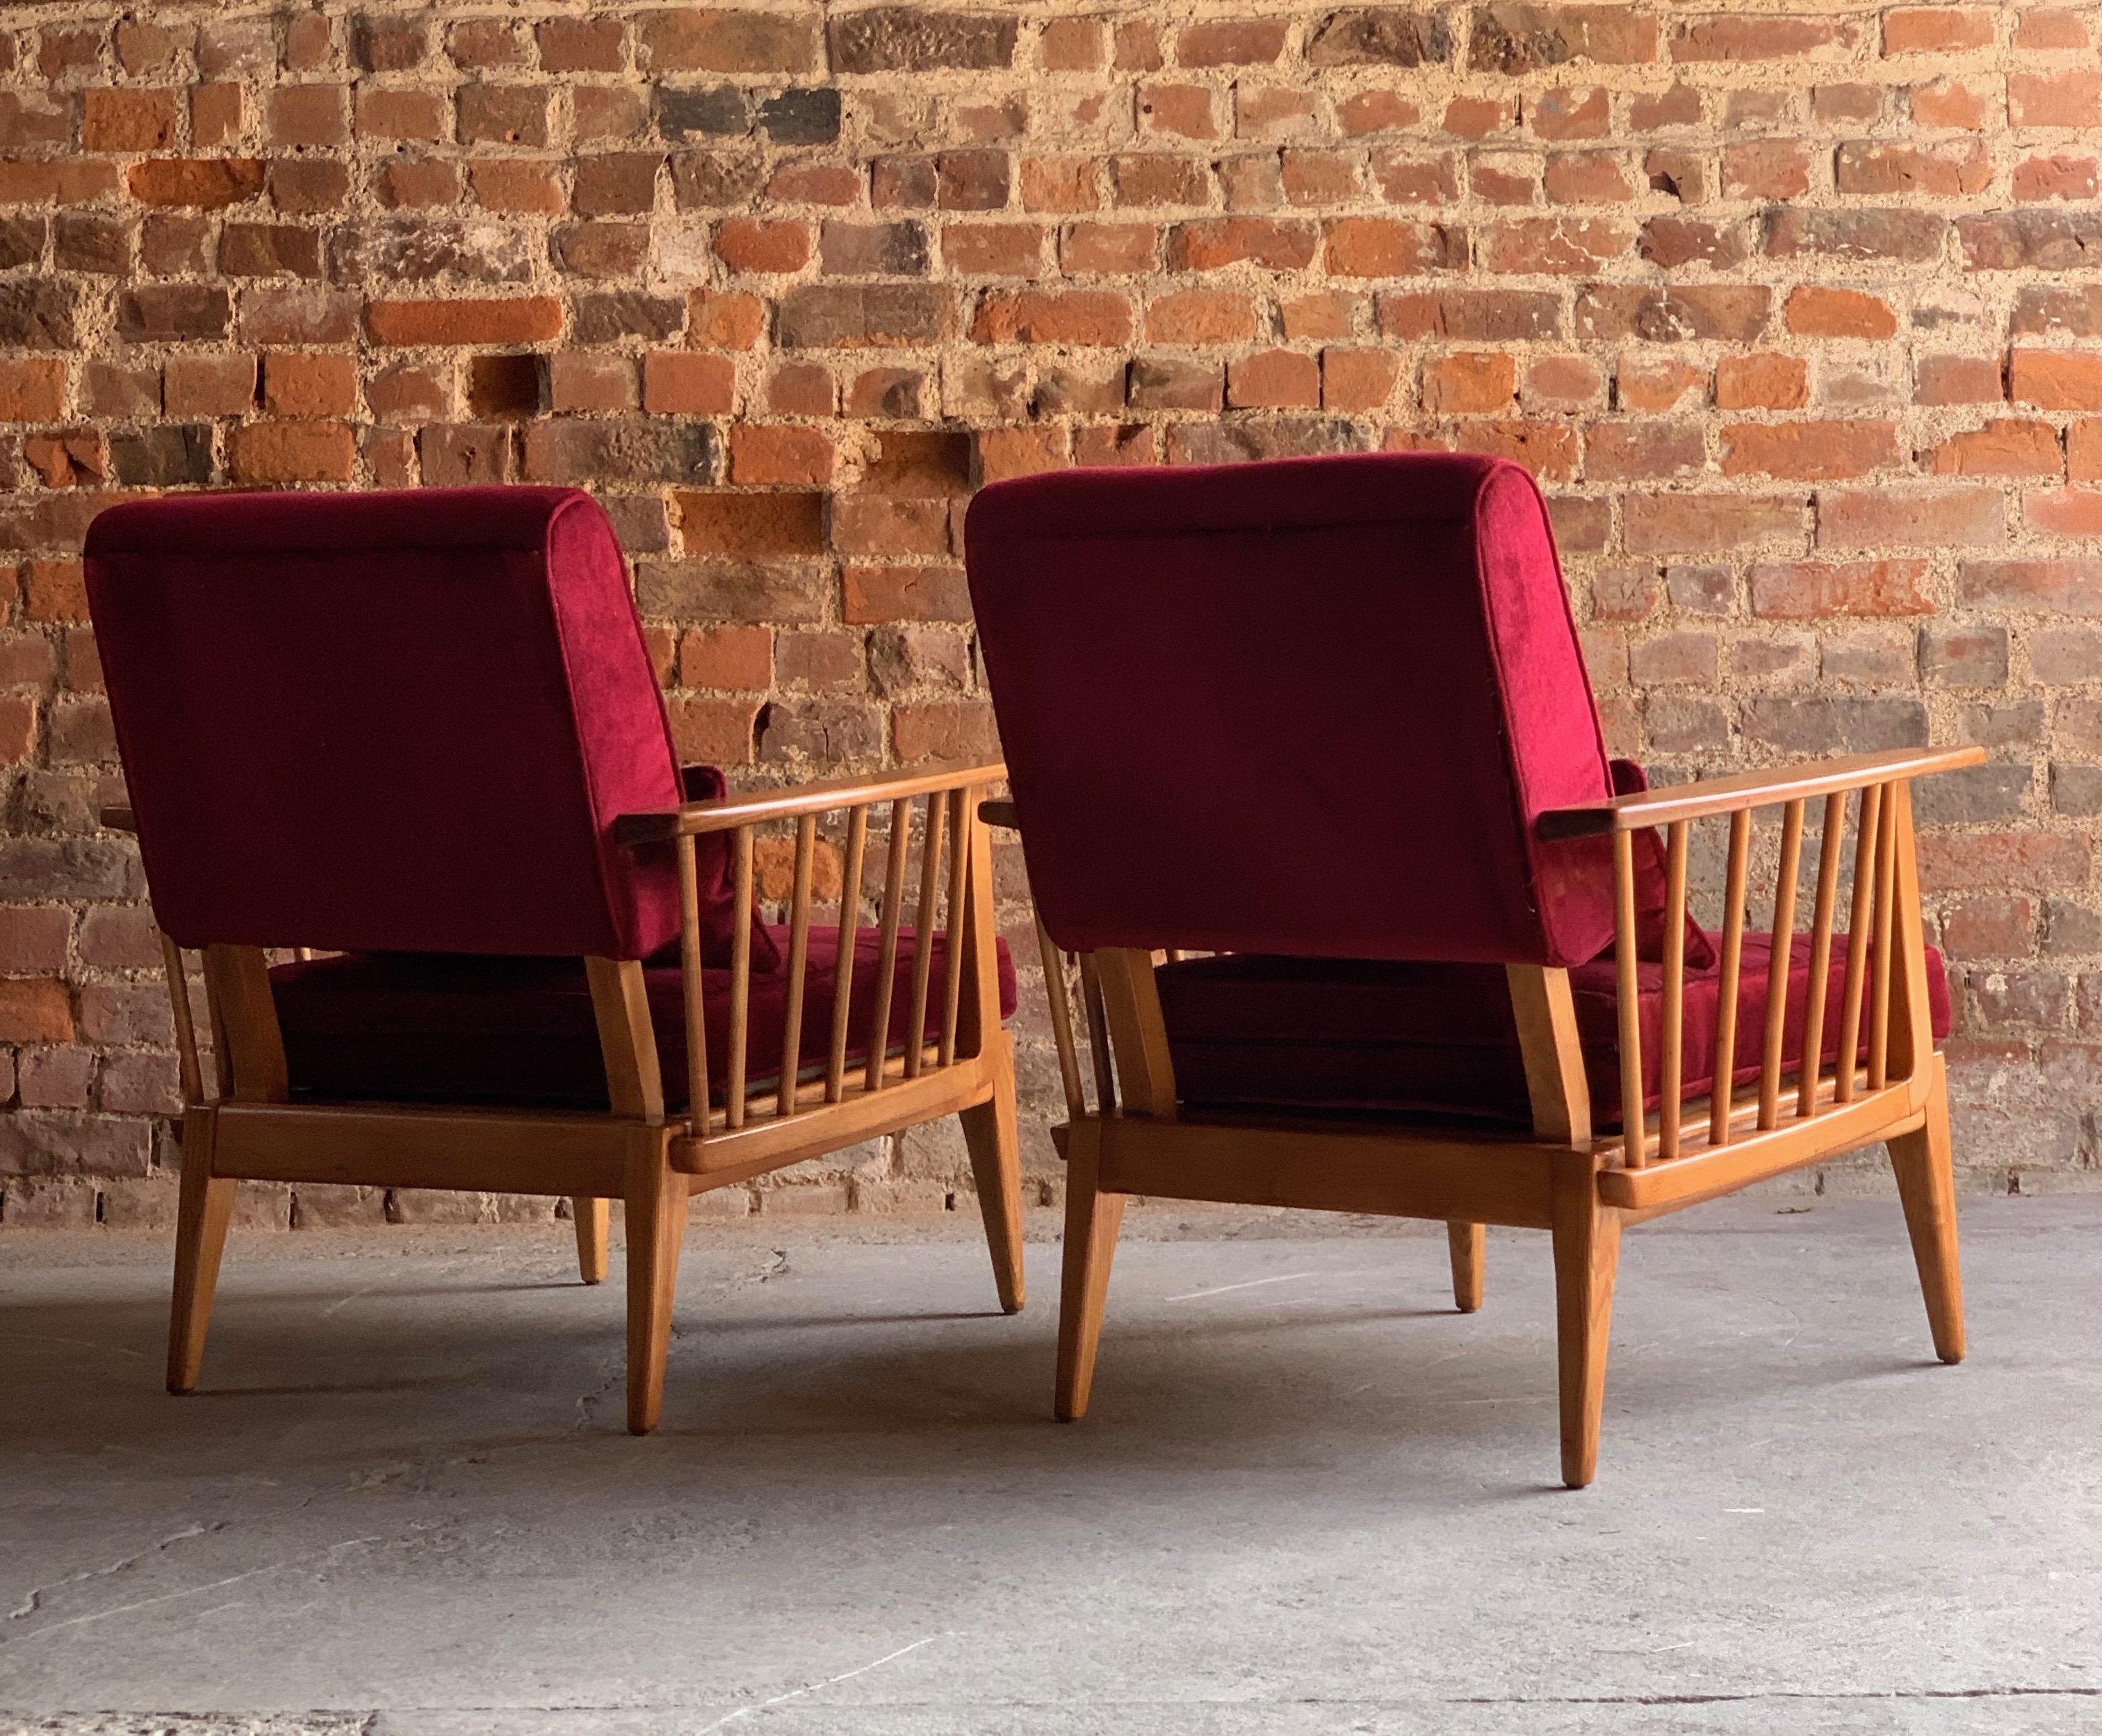 Mid-Century Modern Elm Armchairs Lounge Chairs Pair Danish Circa 1960s

Magnificent midcentury Blonde Elm three-piece Lounge Suite circa 1960, comprising of three-seat sofa and two matching armchairs dressed in cranberry red velvet upholstery with